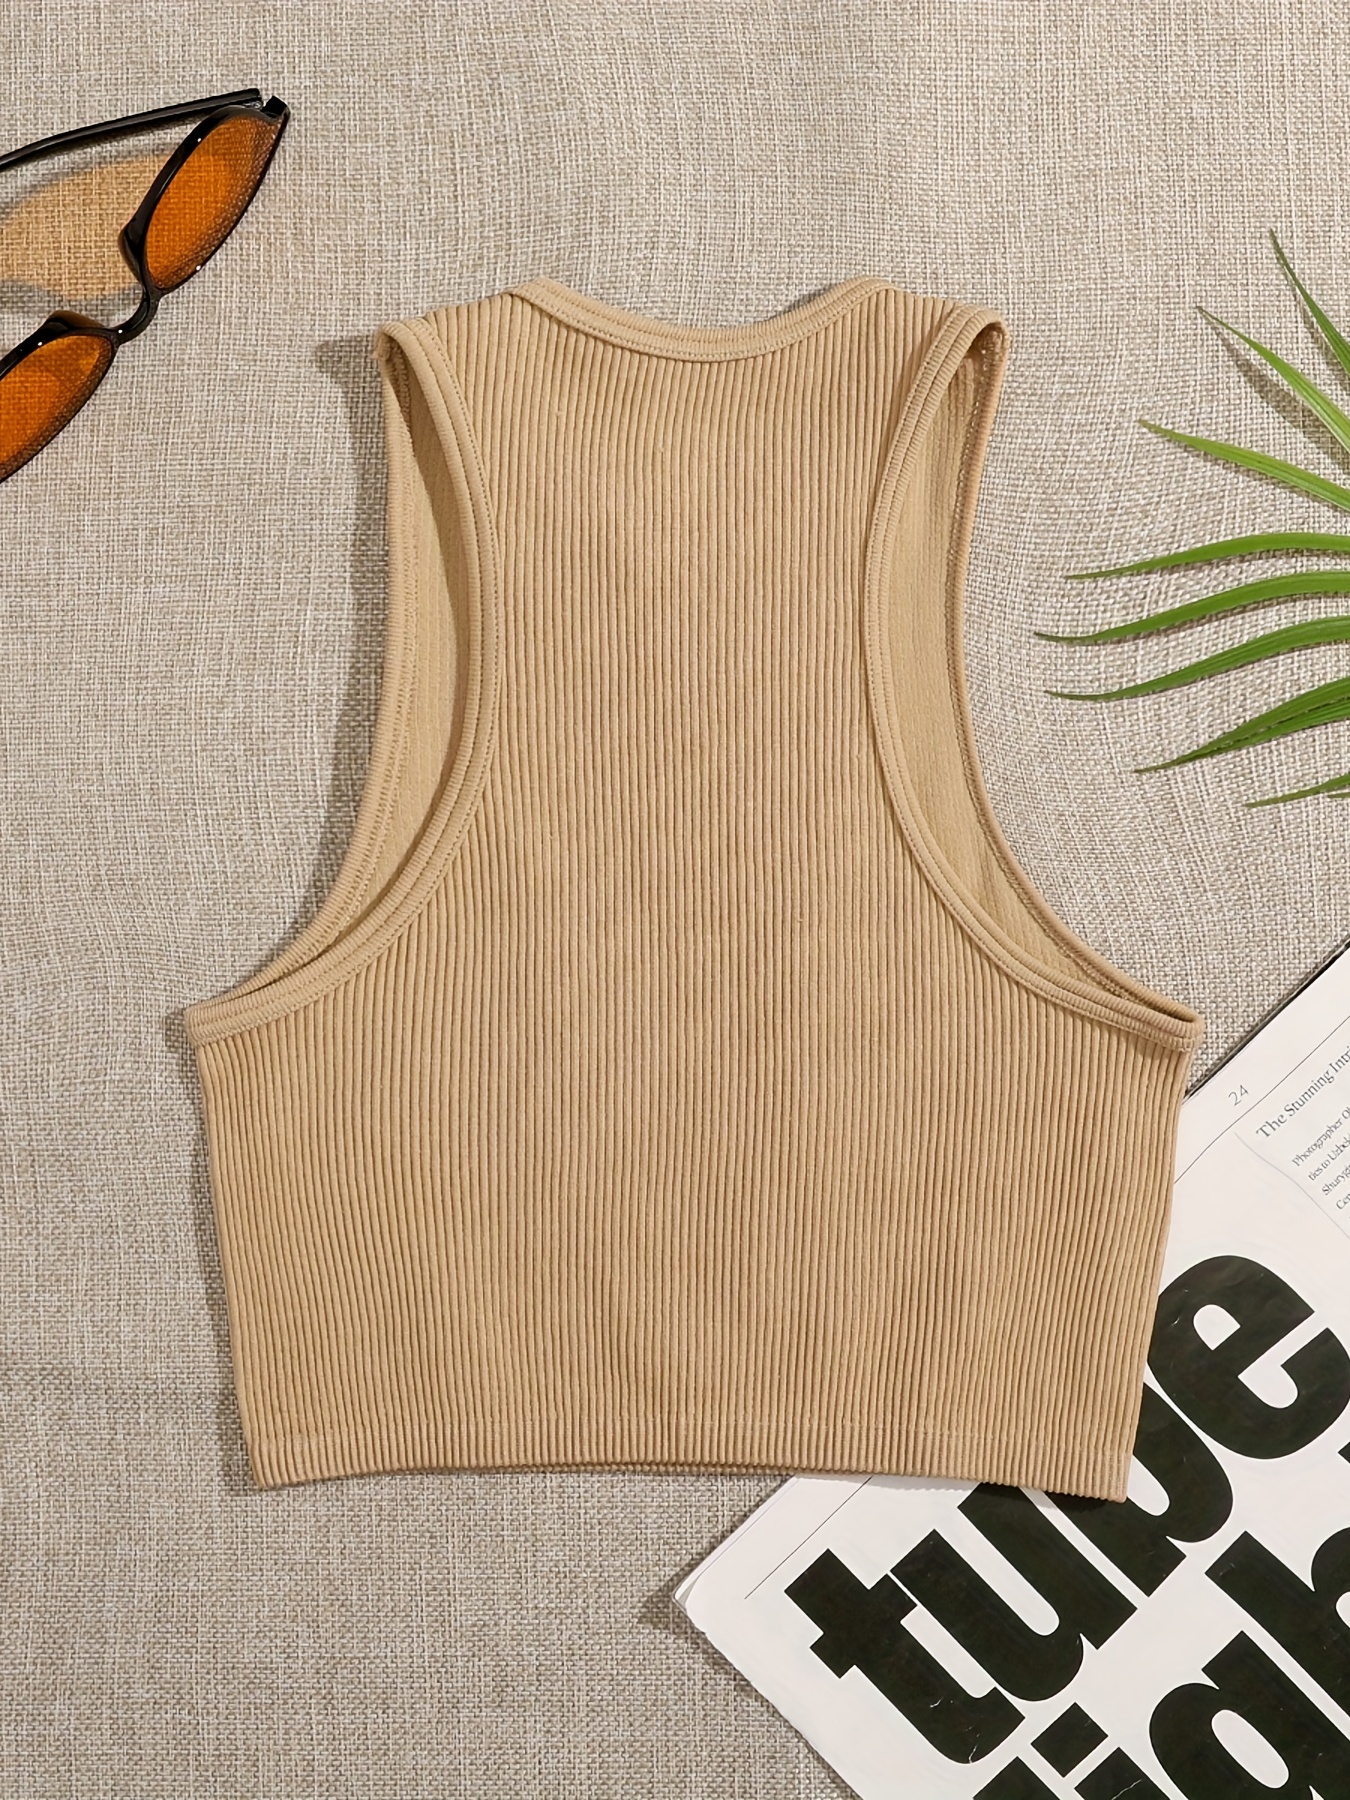 Our Rib-Knit Muscle Tank Top delivers ultimate comfort and style. This tank  hugs your muscles with its stretchy and fitted ribbed fabric